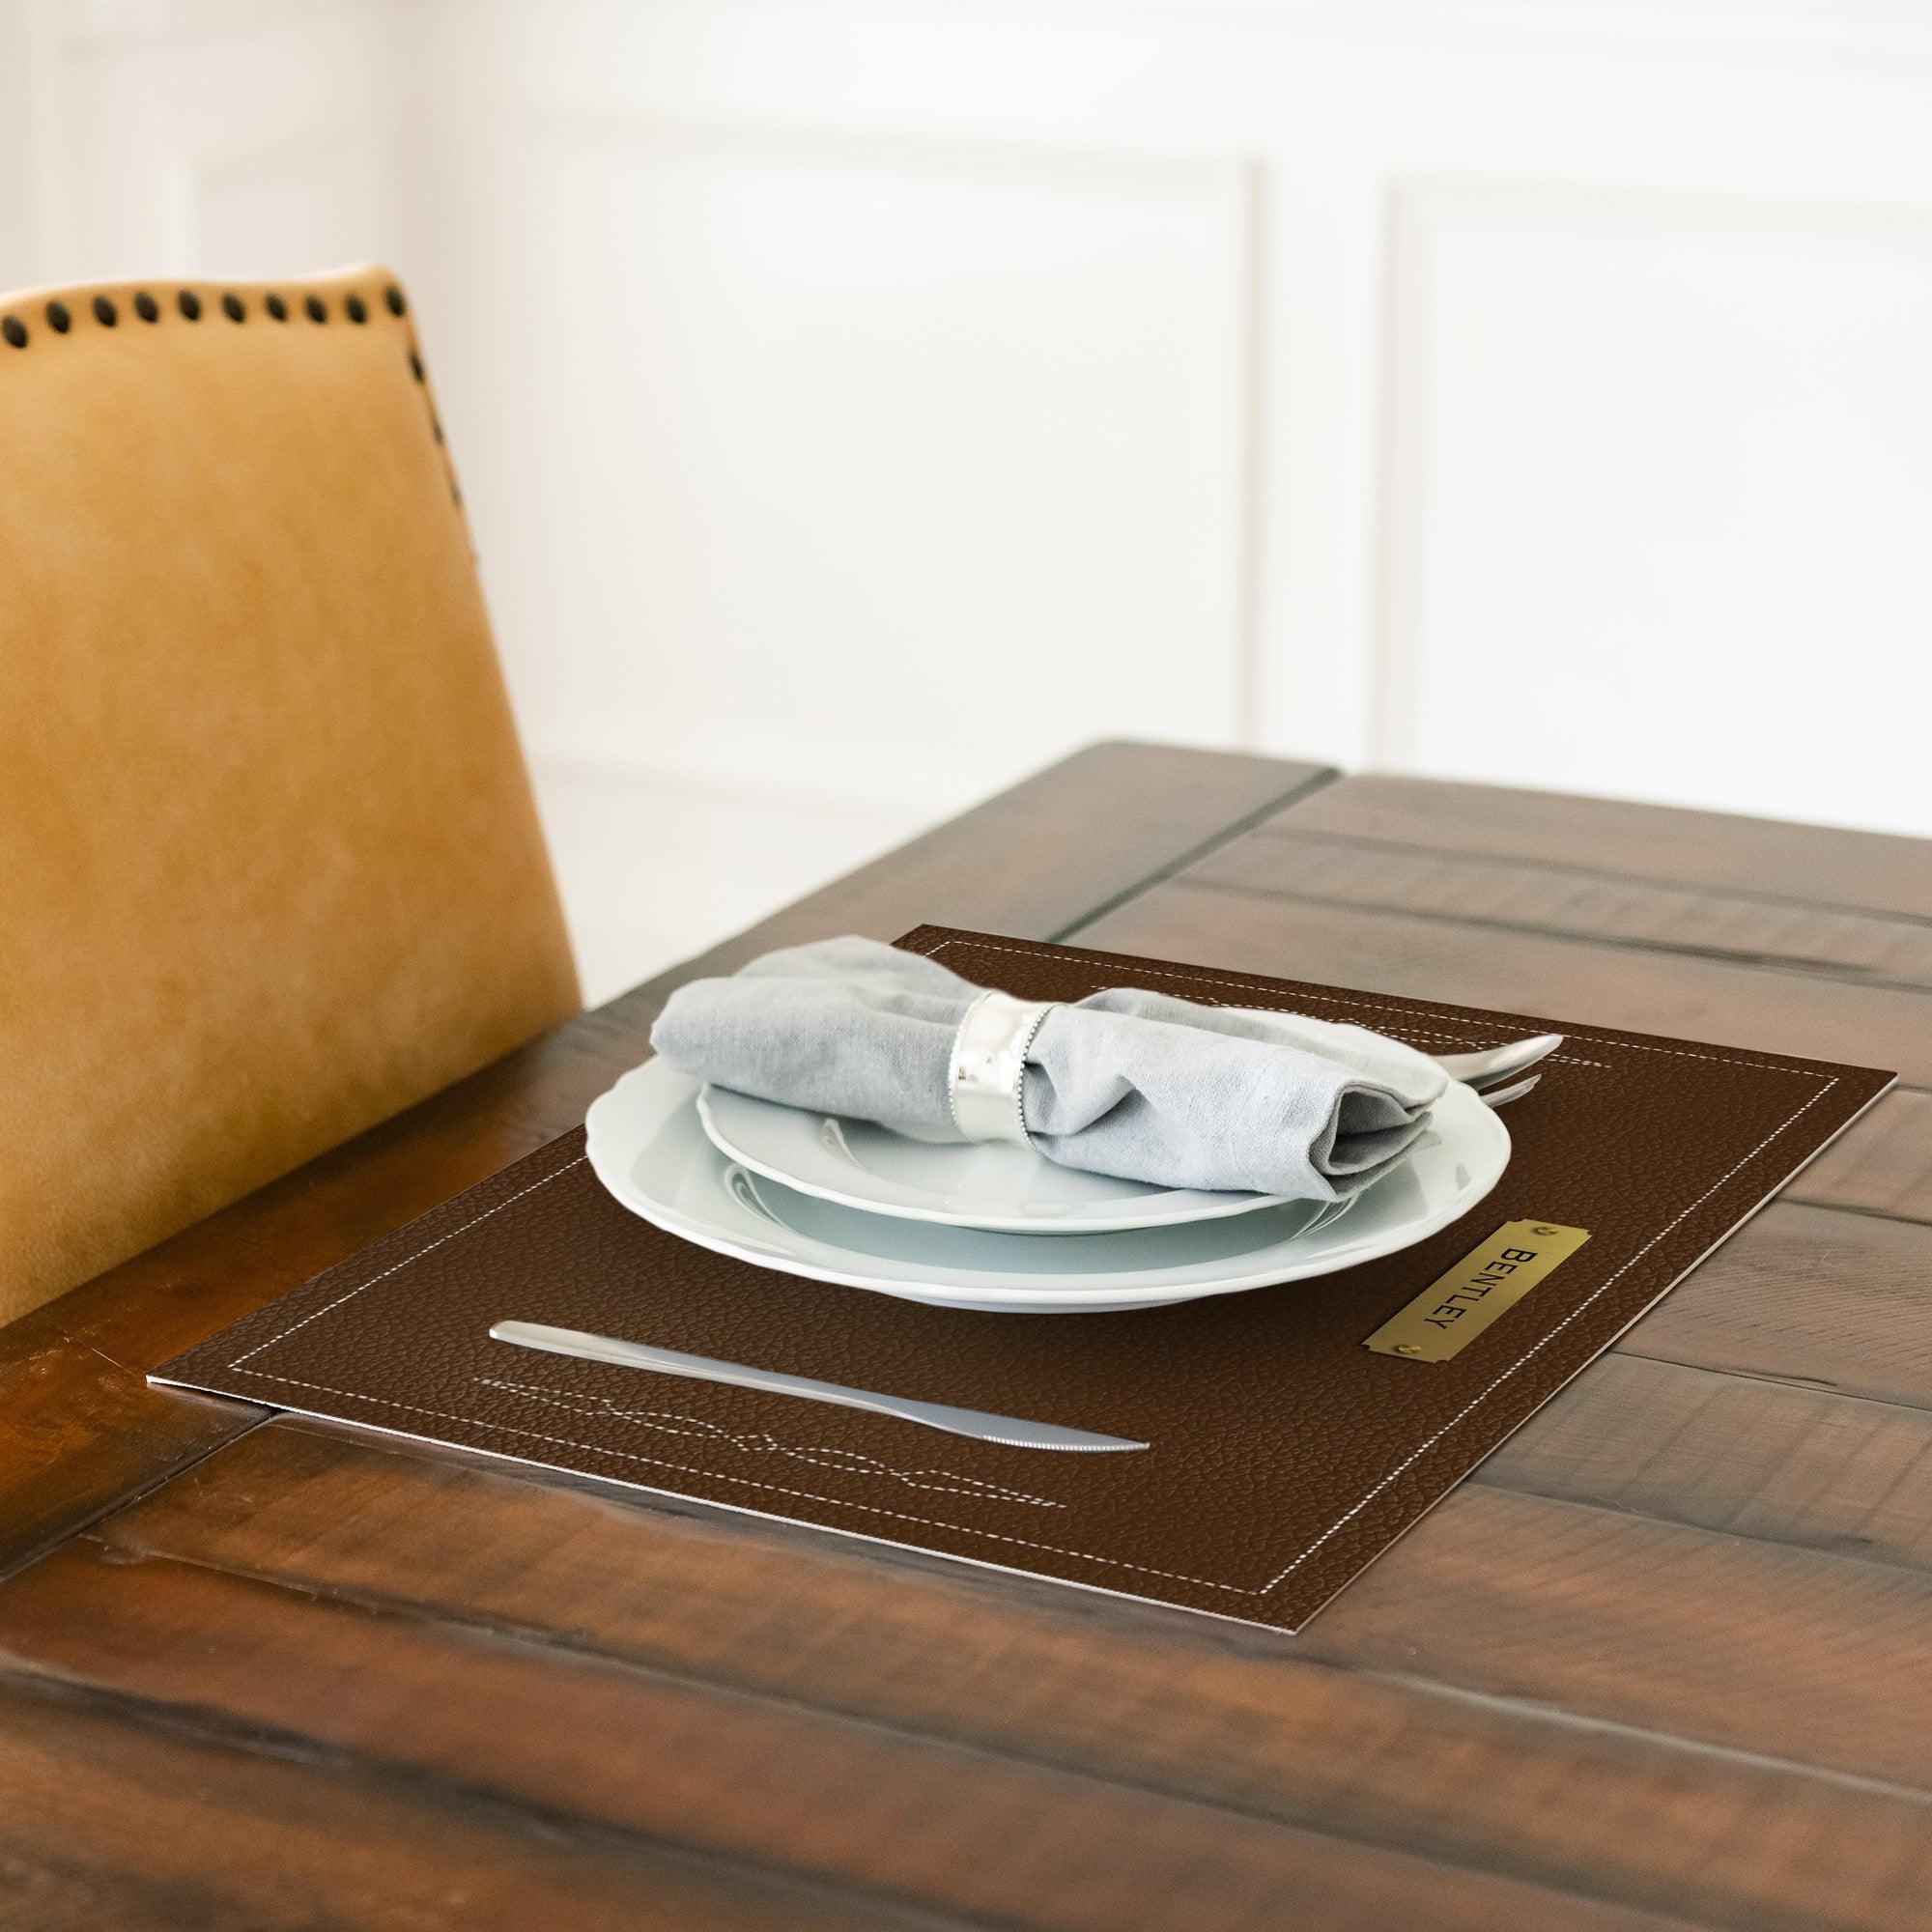 Custom Touch of Class Placemat - Carolina Creekhouse Easy to Clean Premium Vinyl Mats